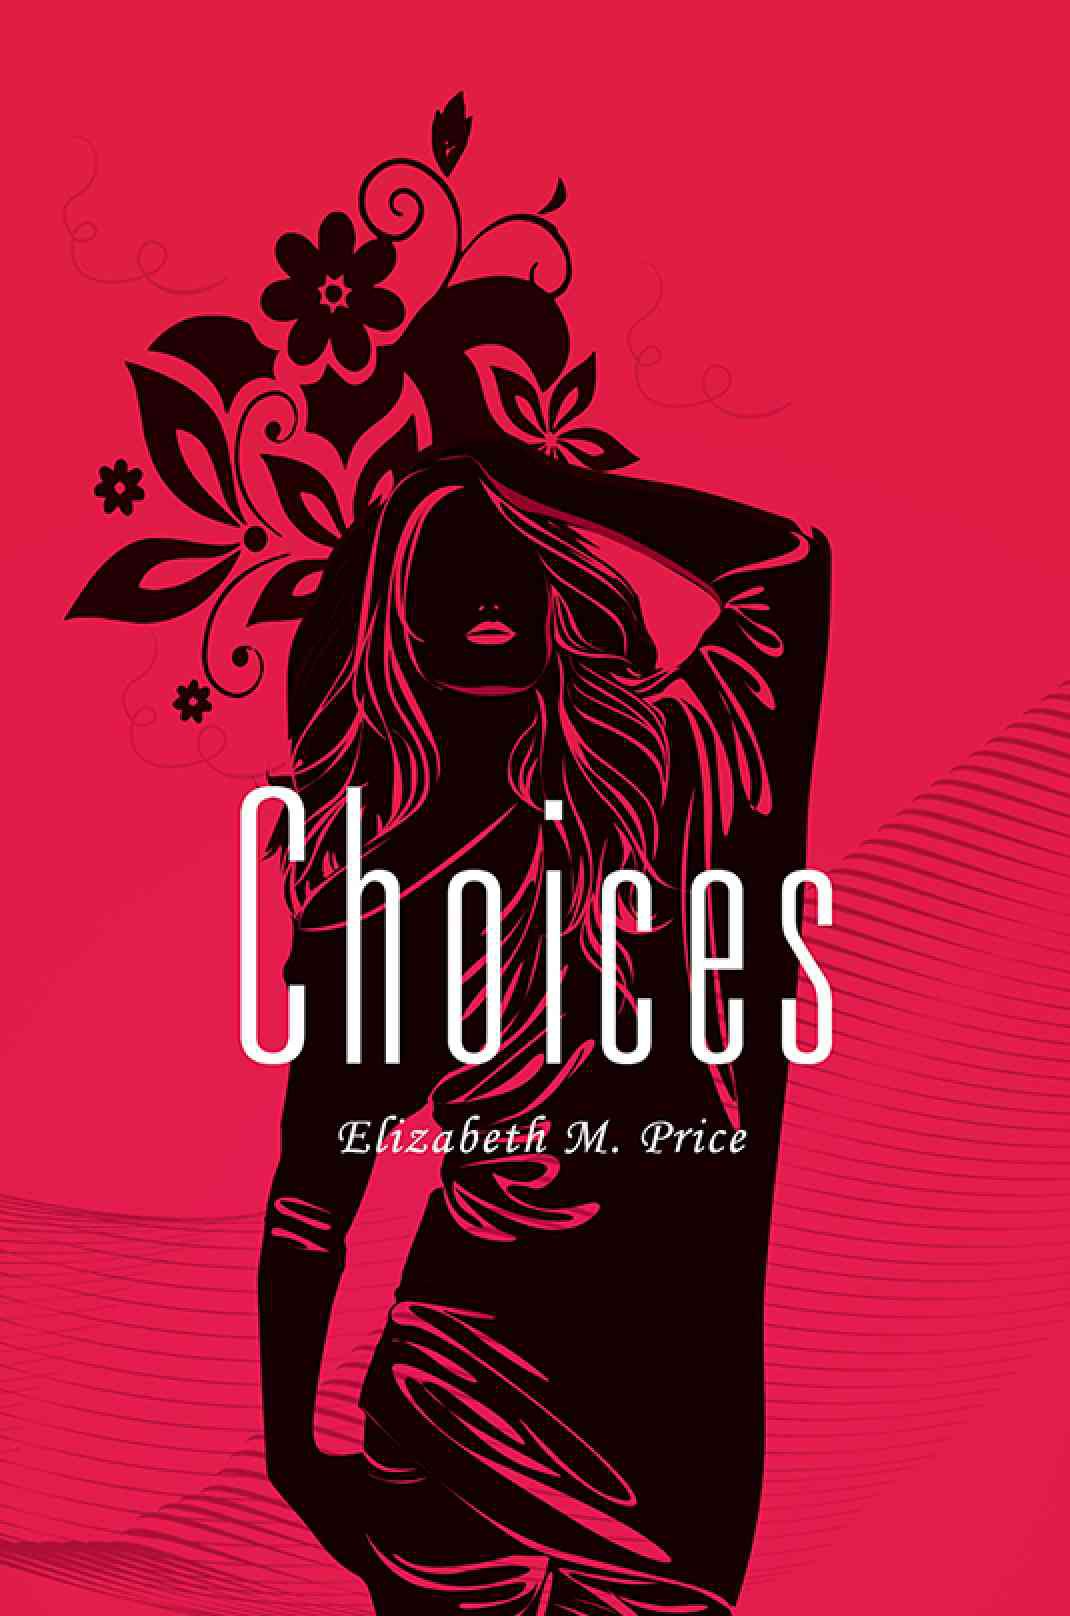 A feature on ‘Choices’ author appears on NZIBS Newsletter